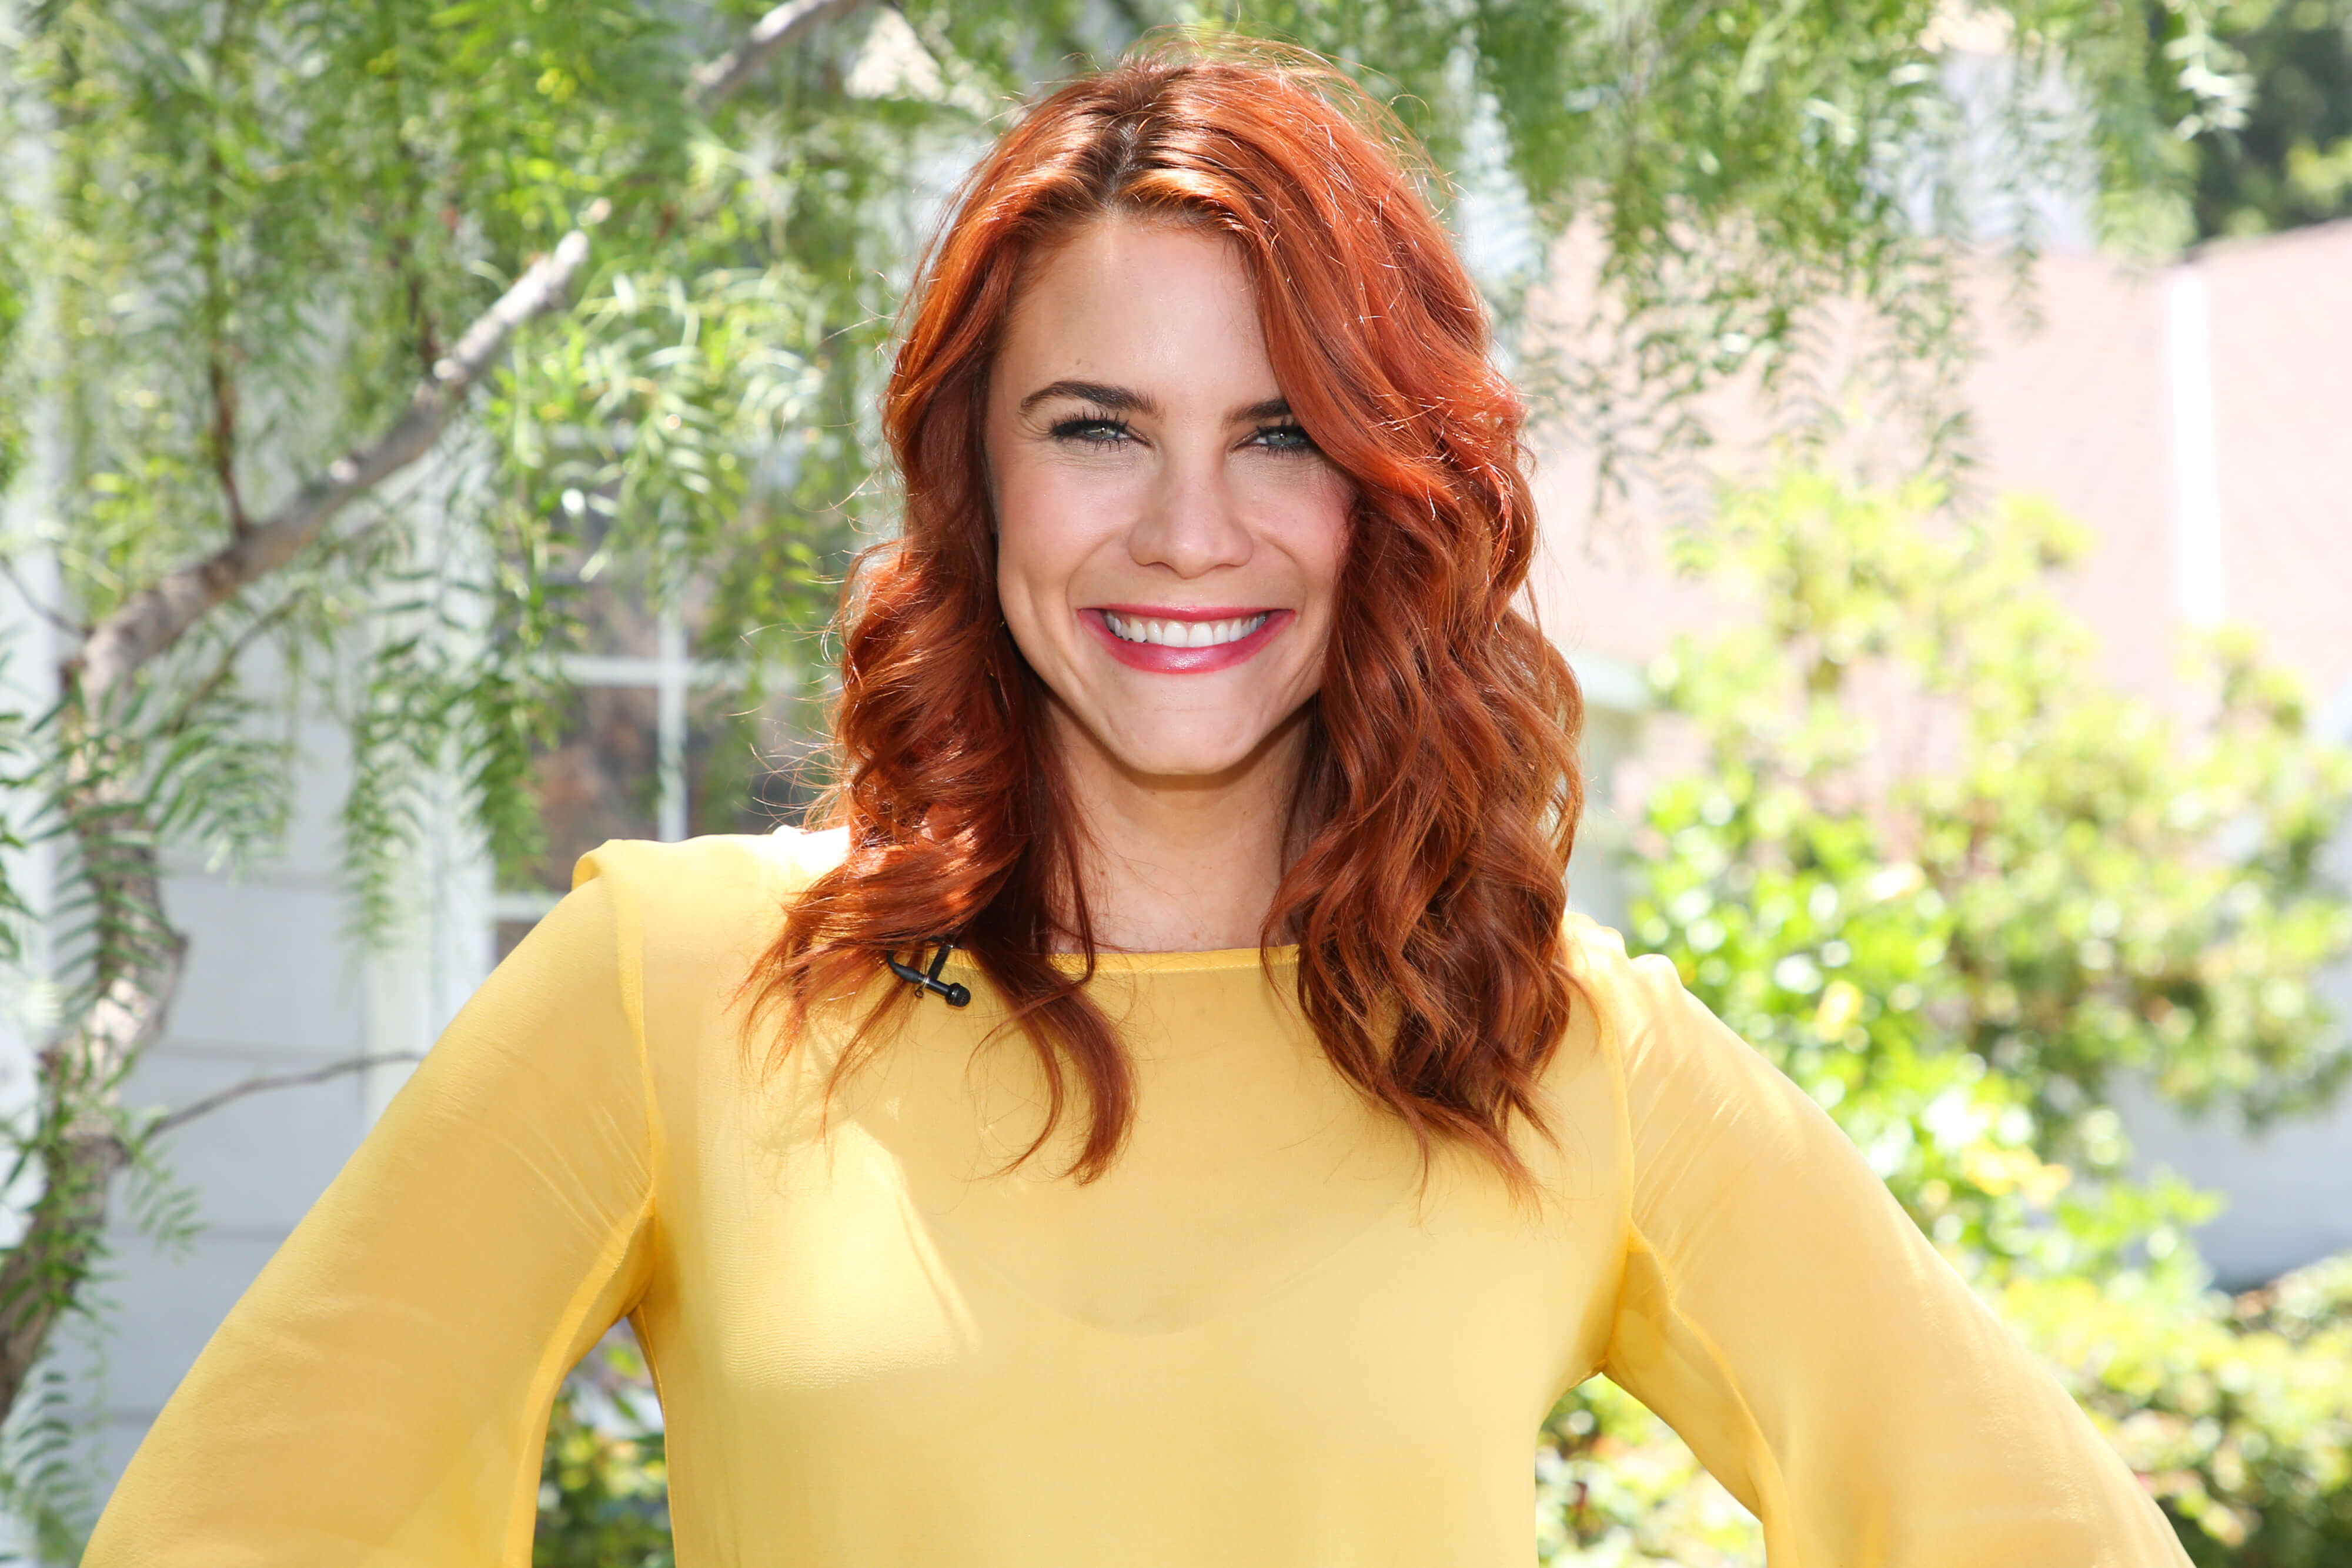 'The Young and the Restless' star Courtney Hope dressed in a yellow blouse; smiling during an outdoor photo.